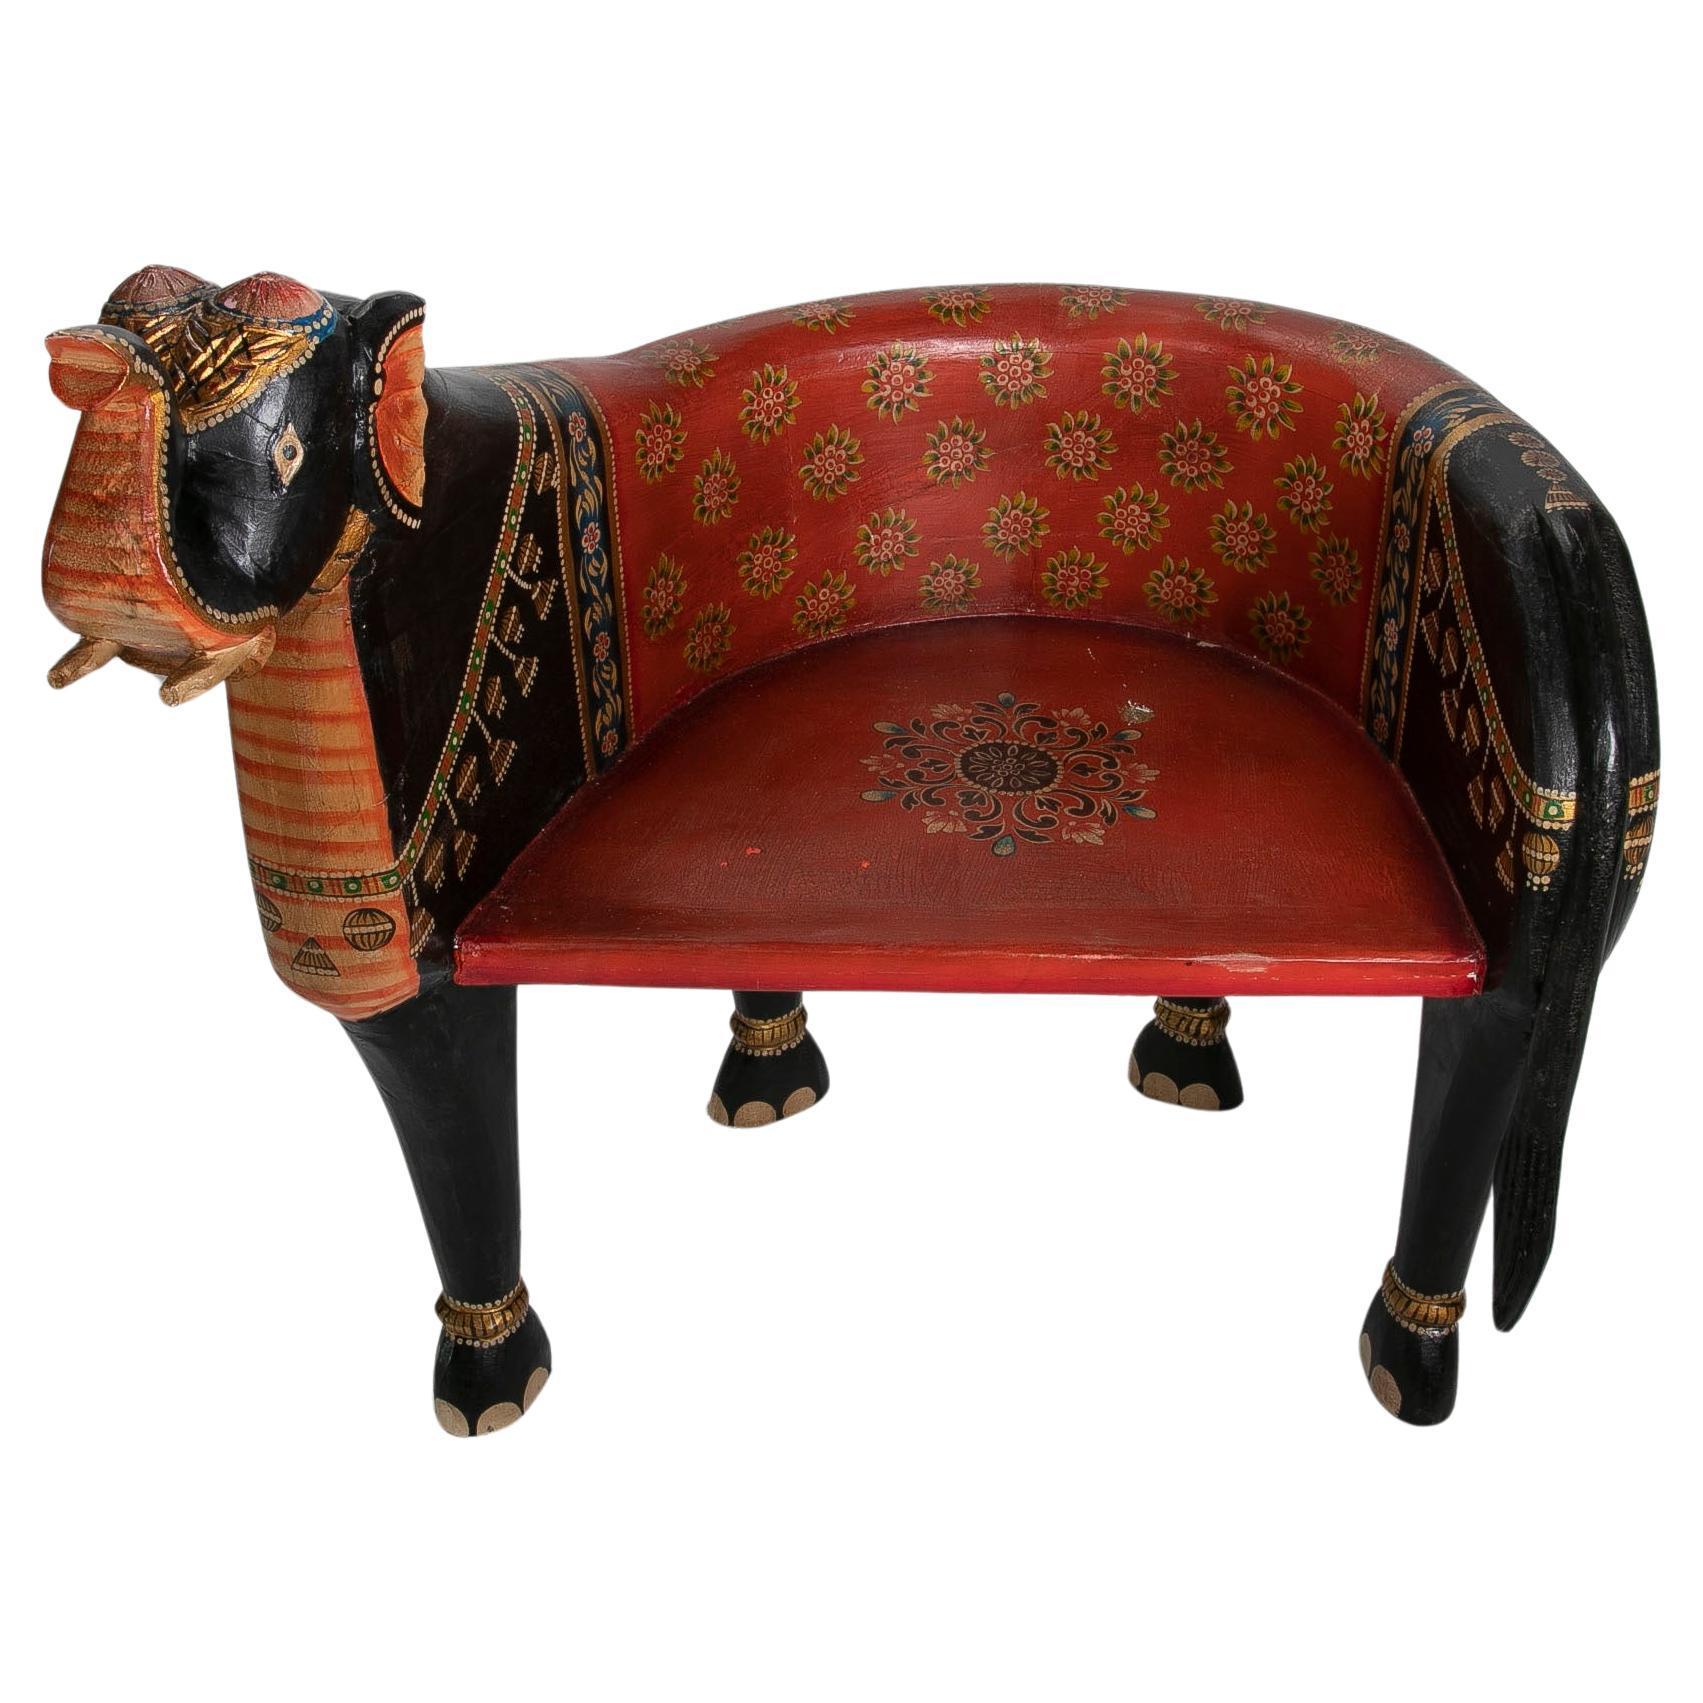 Indian Hand-Carved and Hand-Painted Wooden Elephant Armchair For Sale